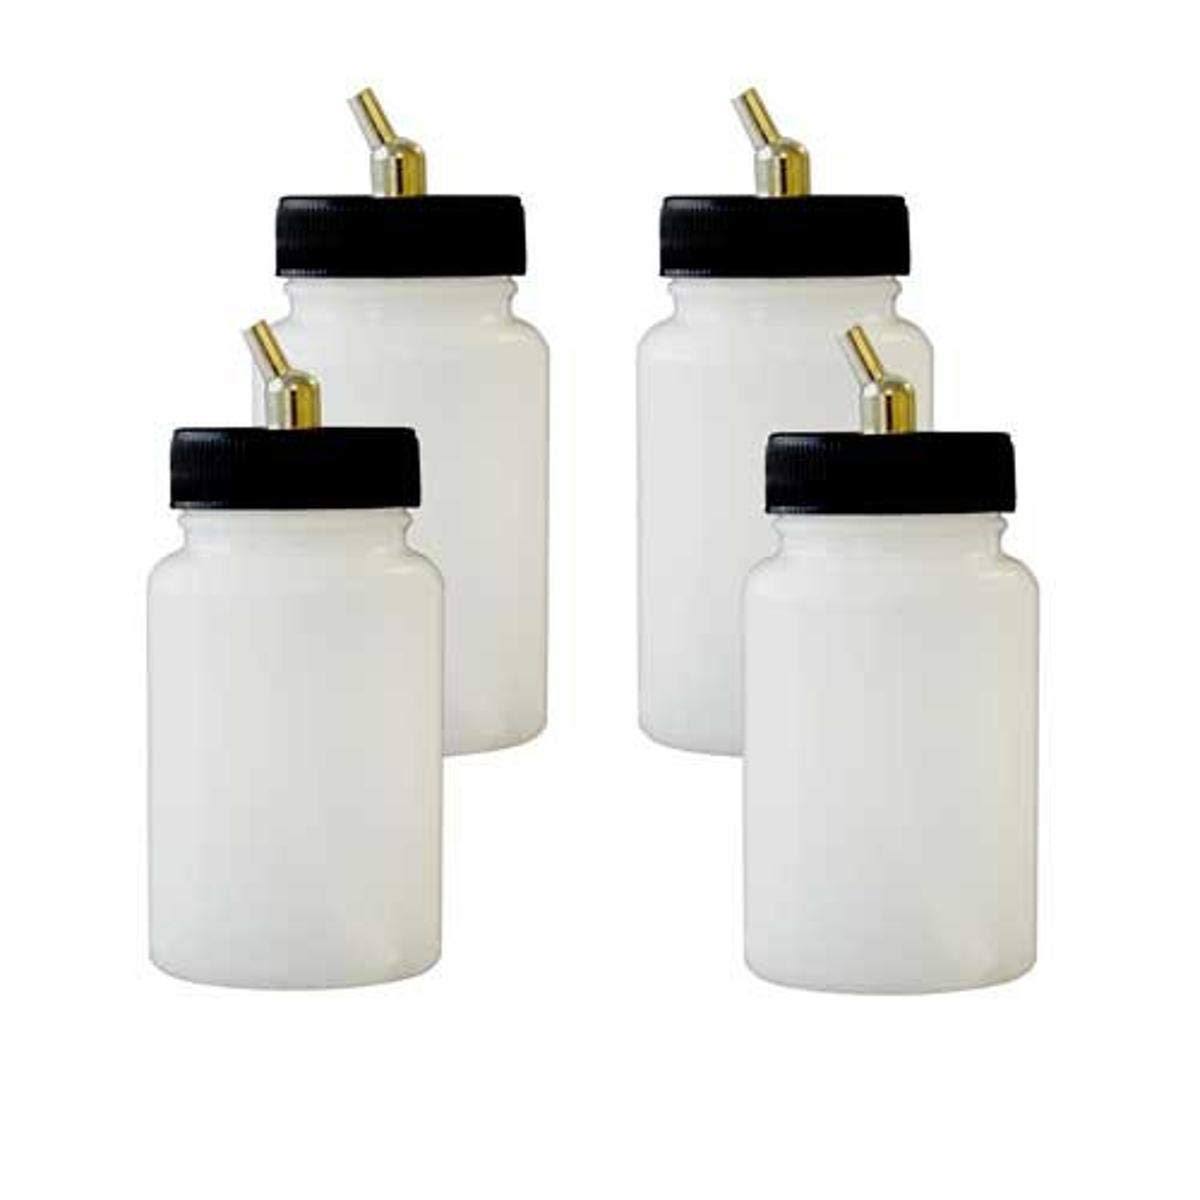 Paasche Airbrush 3oz Double Action Airbrush Bottle Assembly